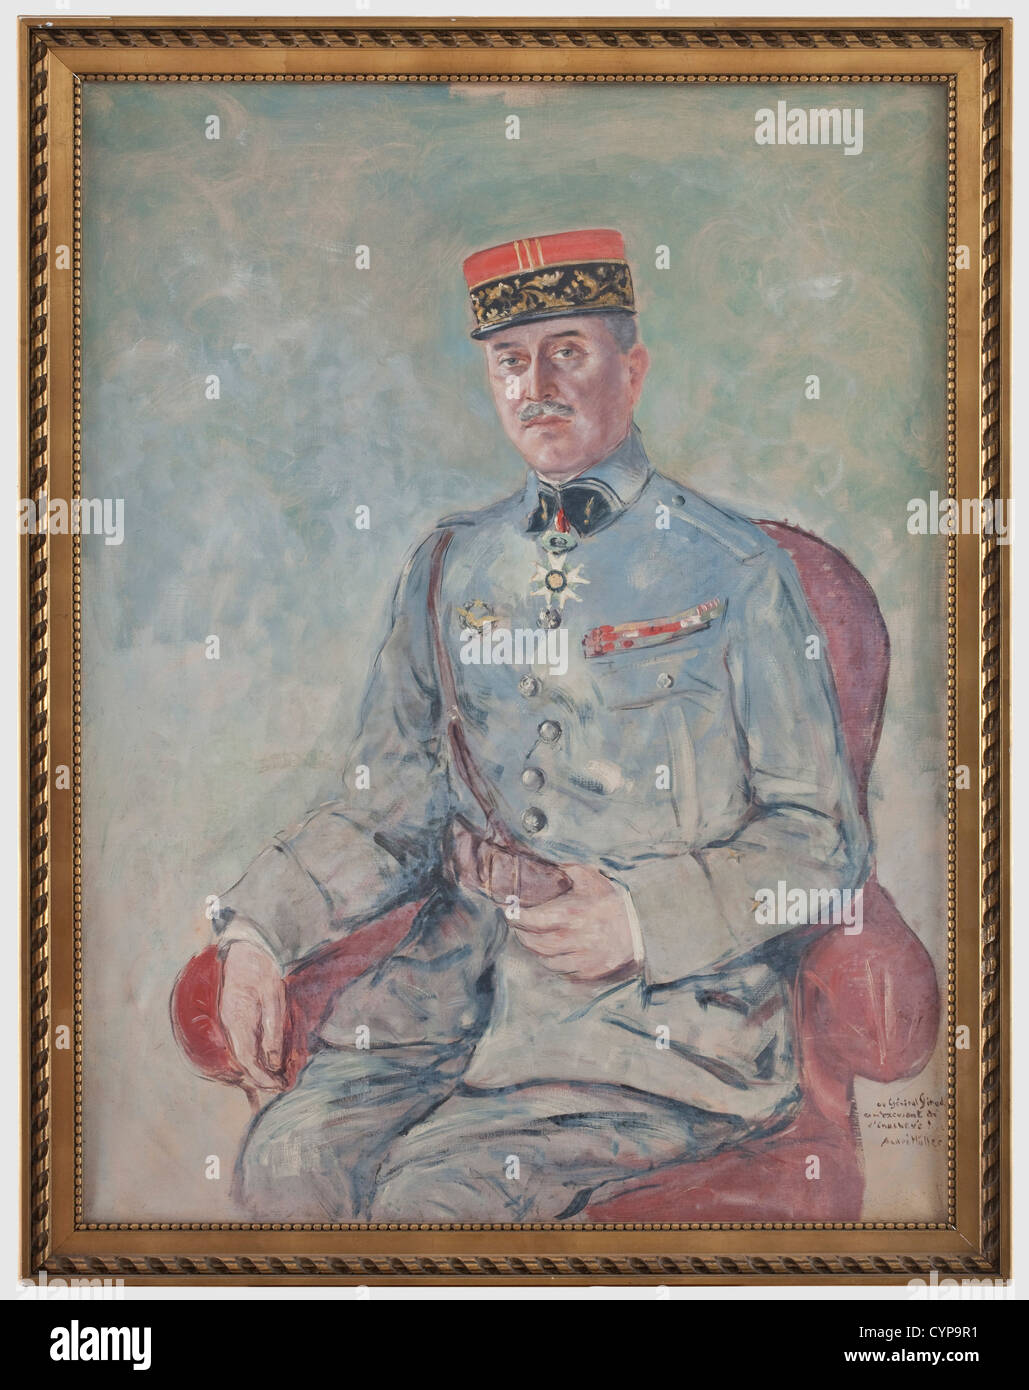 Général Adolphe Girod - a portrait painting by André Müller, Oil on linen with a stretcher frame, signed 'André Müller' at the lower right with the dedication 'en m'excusant de l'inachevé' (an apology for not completing the painting). Adolphe Girod sits in a general's uniform with a kepi, he wears the cross of a Commander of the Legion of Honour, a pilot's badge and a field orders clasp as well as a leather waist belt with shoulder straps. Framed dimensions 127.5 x 100 cm, painting 116.5 x 89 cm. In need of restoration, people, 20th century, troop, troops, arme, Stock Photo